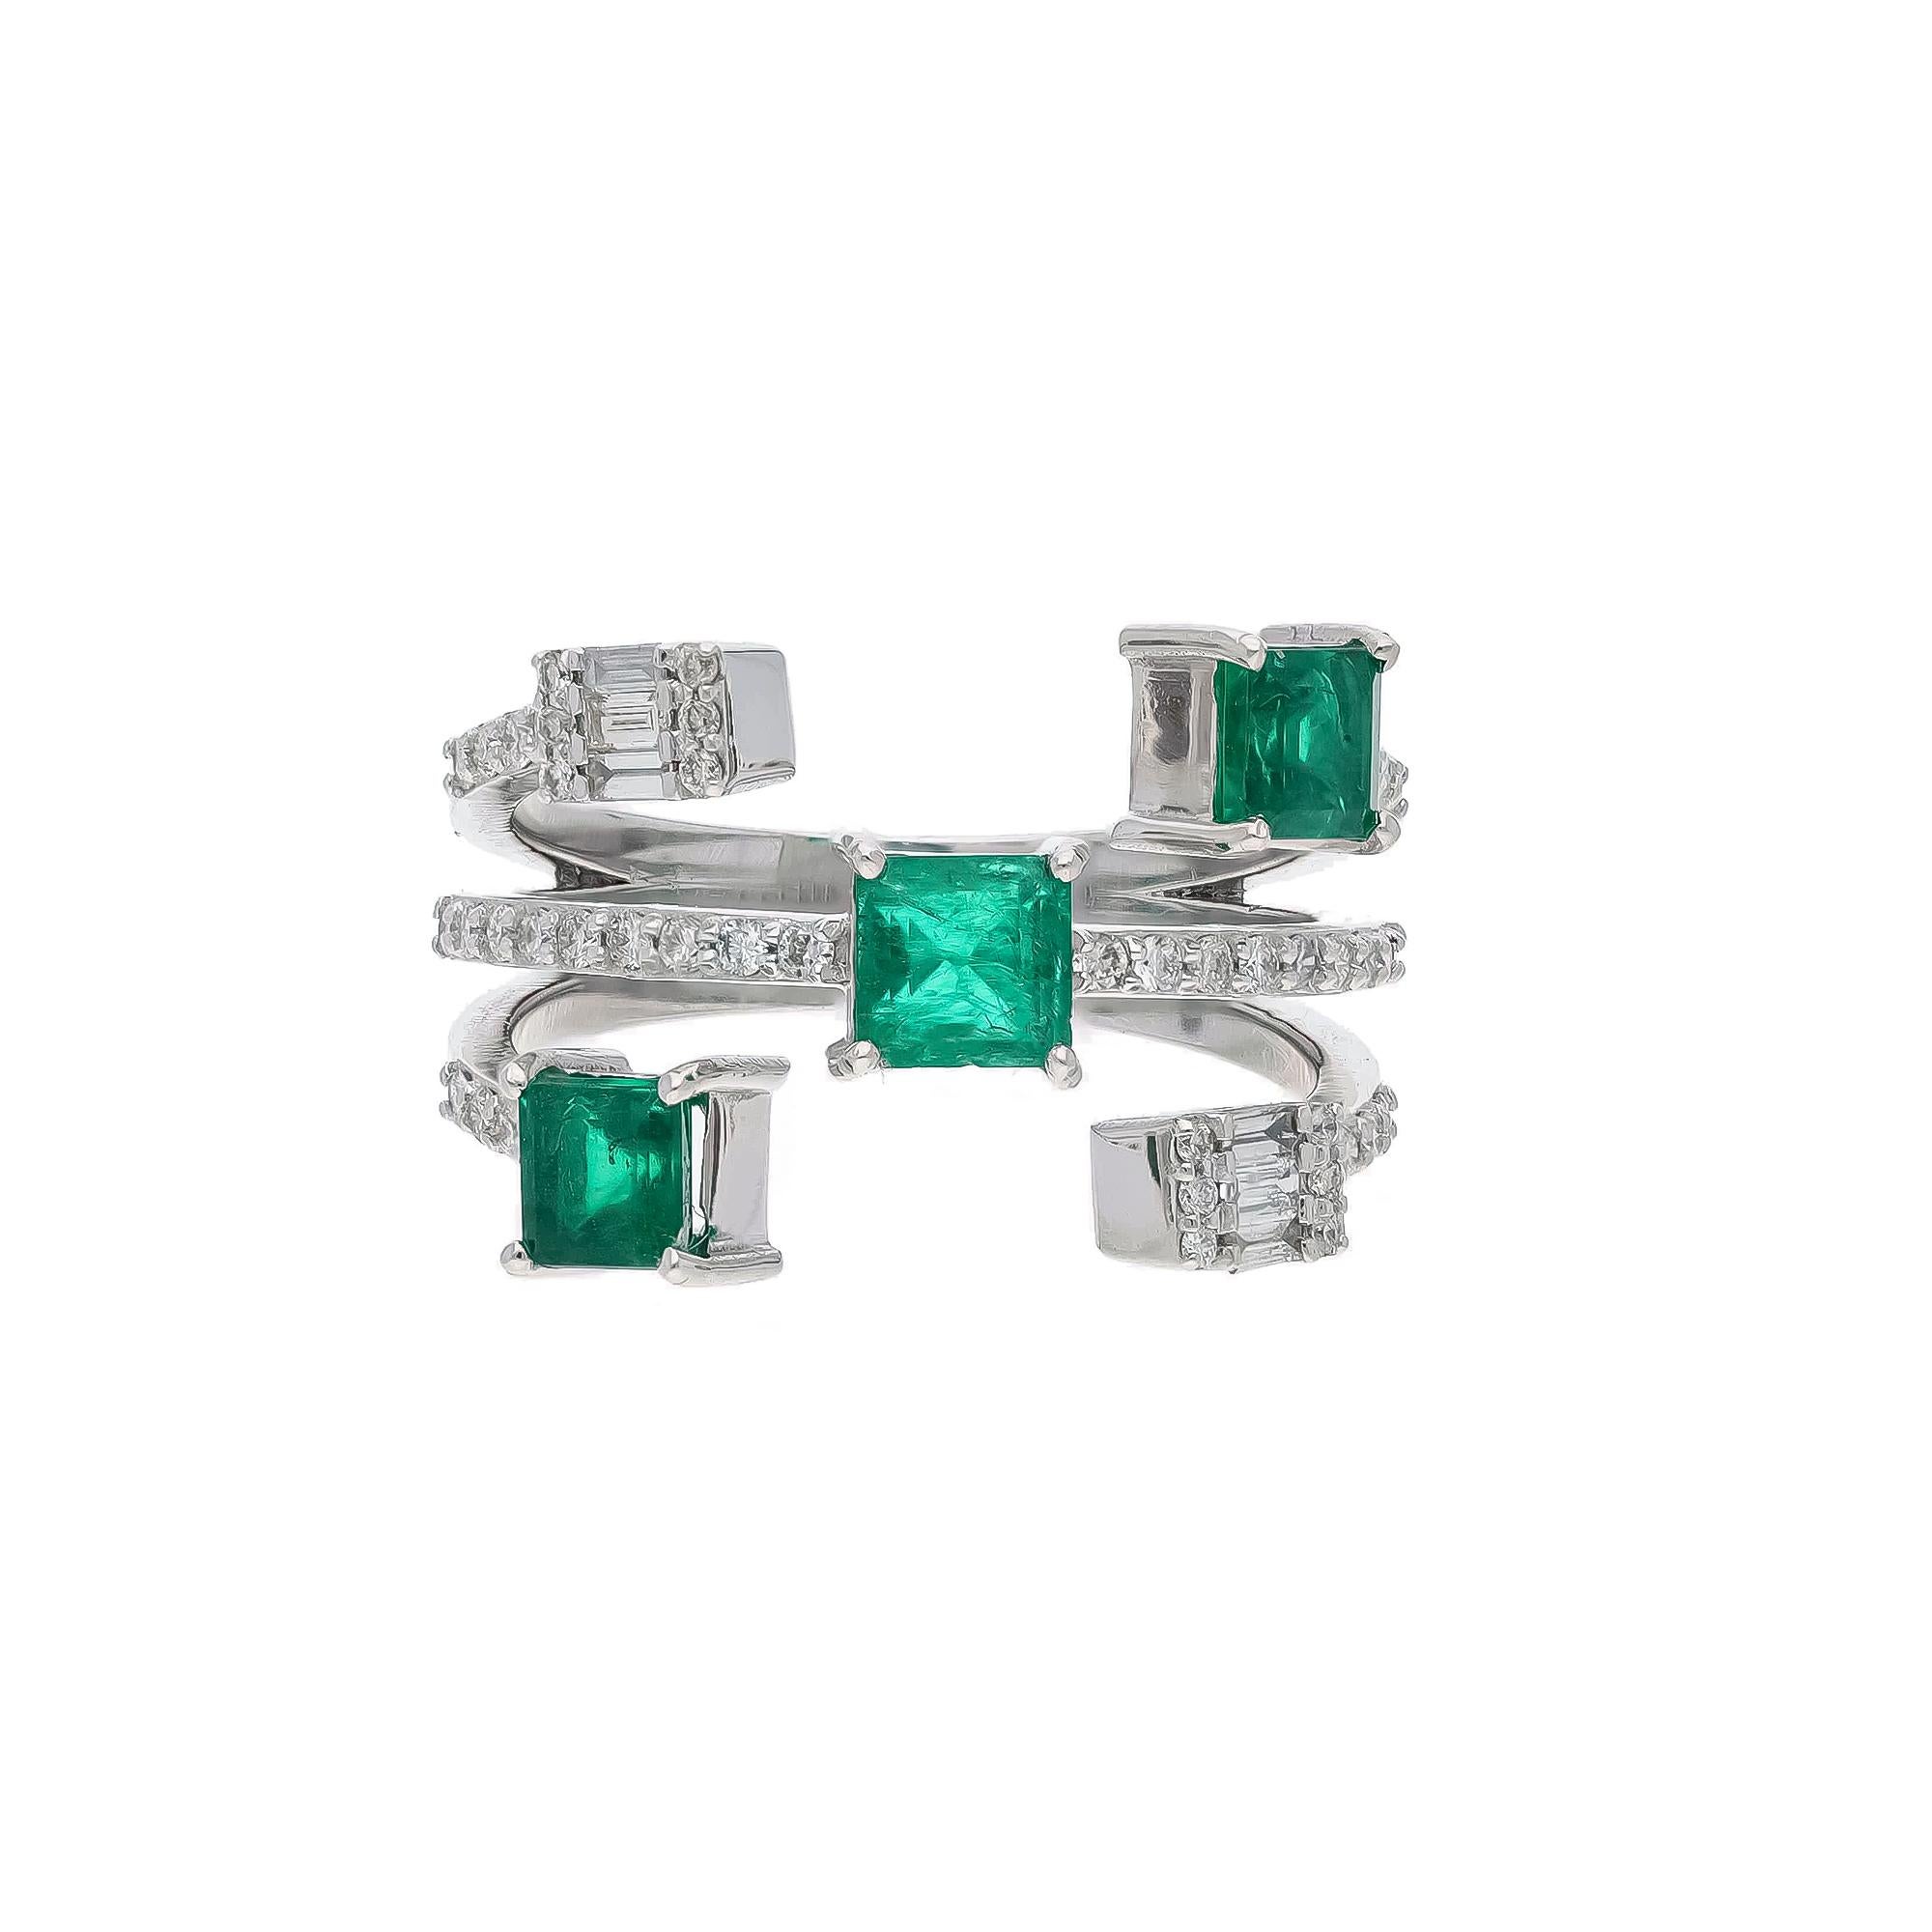 Diamonds : 0.42 carats
Emerald : 1.37carats
Gold :5.88 gm( 18k)

This is a beautiful natural Columbian ring  with very high quality emeralds and diamonds ( vsi and G colour

Its very hard to capture the true color and luster of the stone, I have